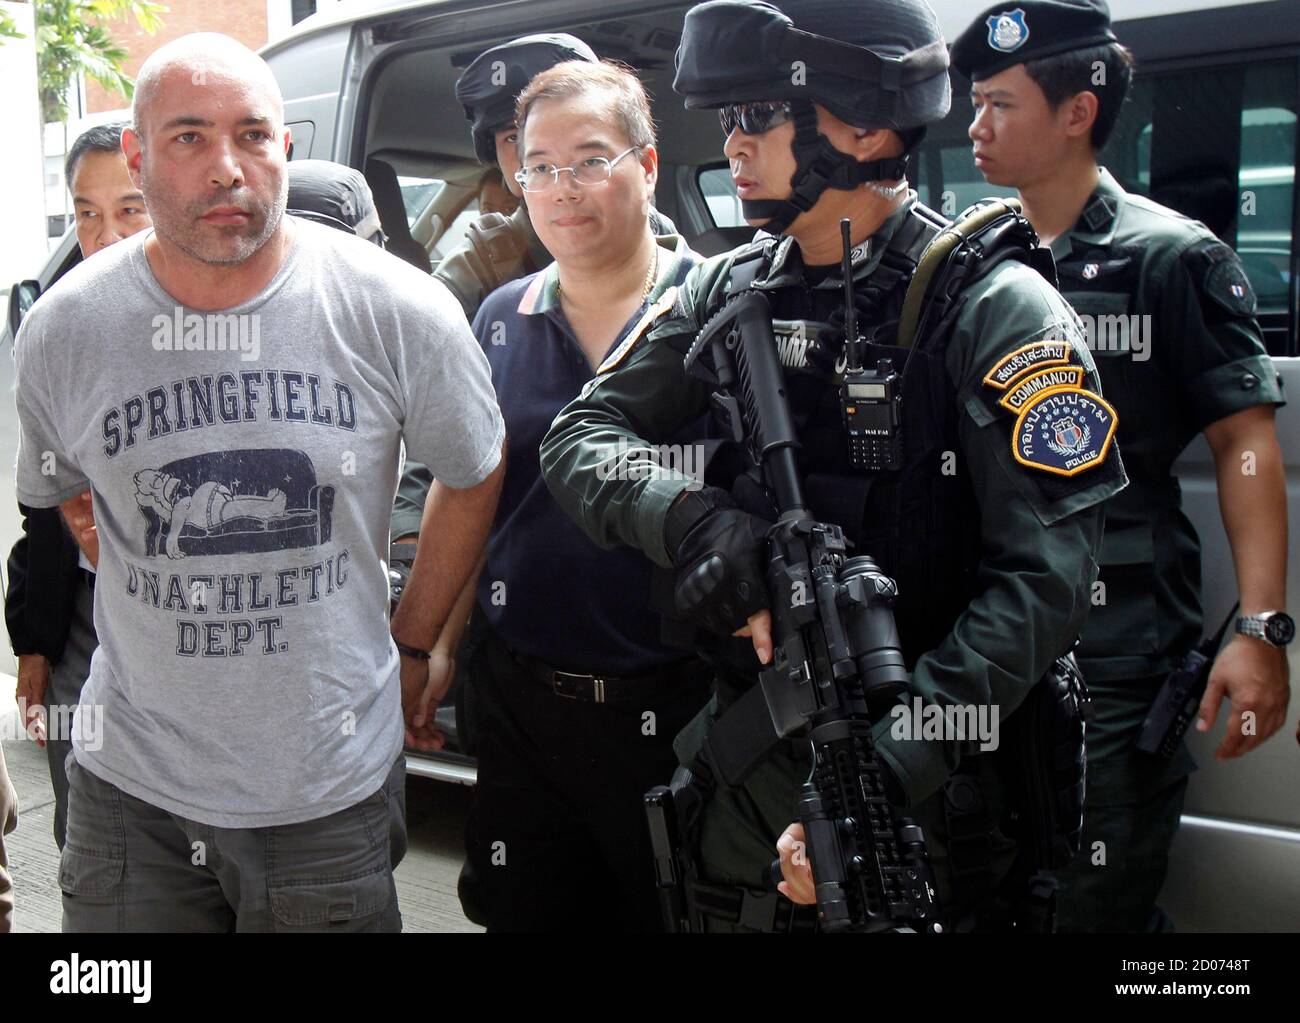 Thai policemen escort American drug suspect Joseph Hunter, 48, as he arrives at Don Mueang International Airport in Bangkok September 27, 2013. Thai police transferred six foreigners suspected of drug smuggling to Bangkok on Thursday after their arrests in the seaside resort, Phuket. Hunter, along with two British, a Taiwanese, a Slovak, and a Filipino were arrested on Phuket island on Wednesday following a tip-off from the United States Drug Enforcement Administration (DEA).   REUTERS/Chaiwat Subprasom (THAILAND - Tags: CRIME LAW DRUGS SOCIETY) Foto de stock